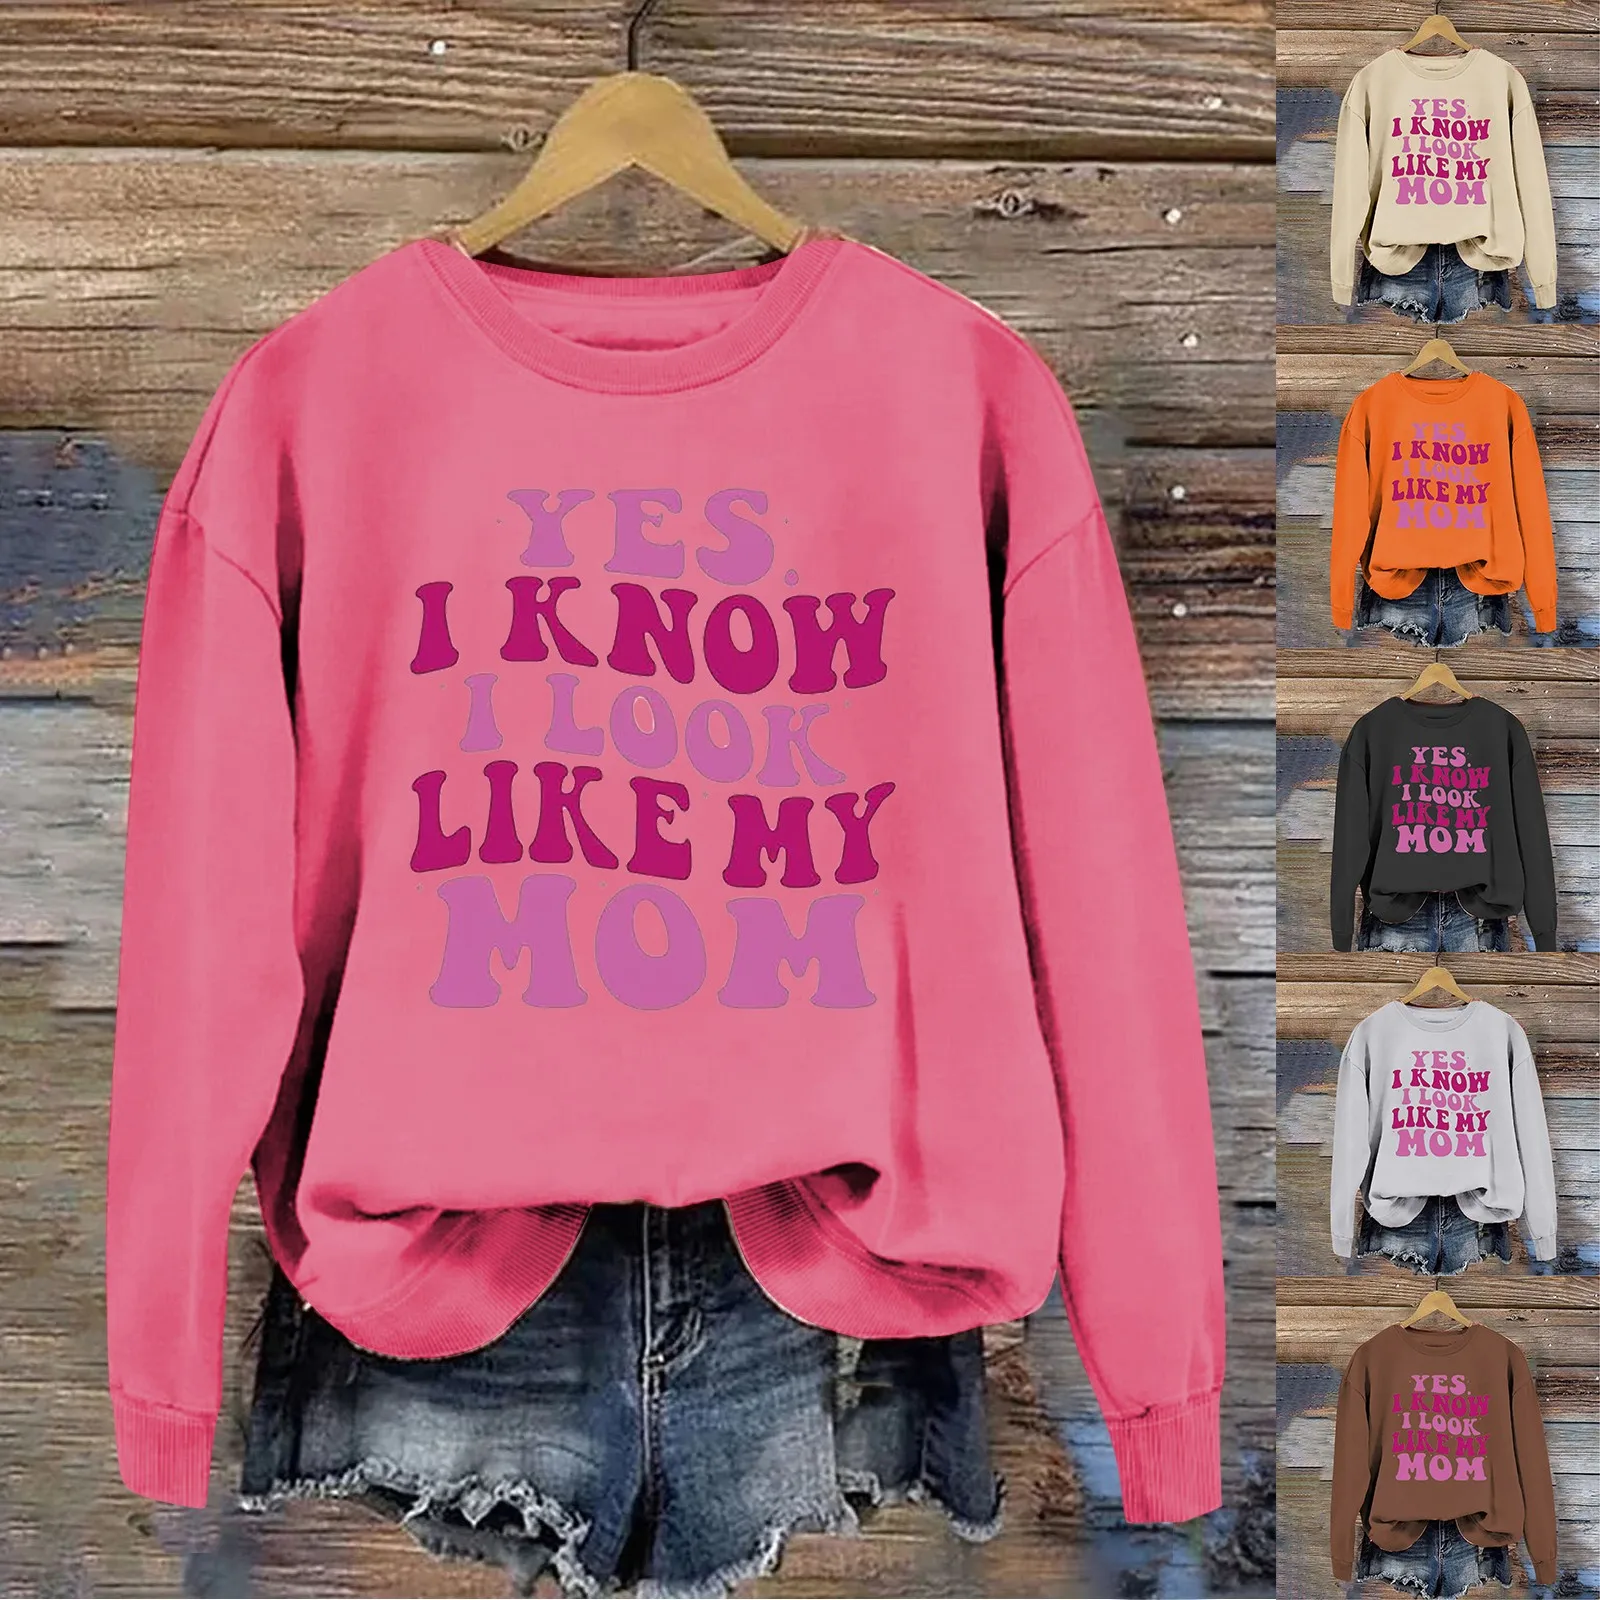 

Yes I Know I Look Like My Mom Sweatshirts Women's Funny Full Zip Athletic Jacket Cotton Blend Sweatshirt Women Ladies Sweatshirt